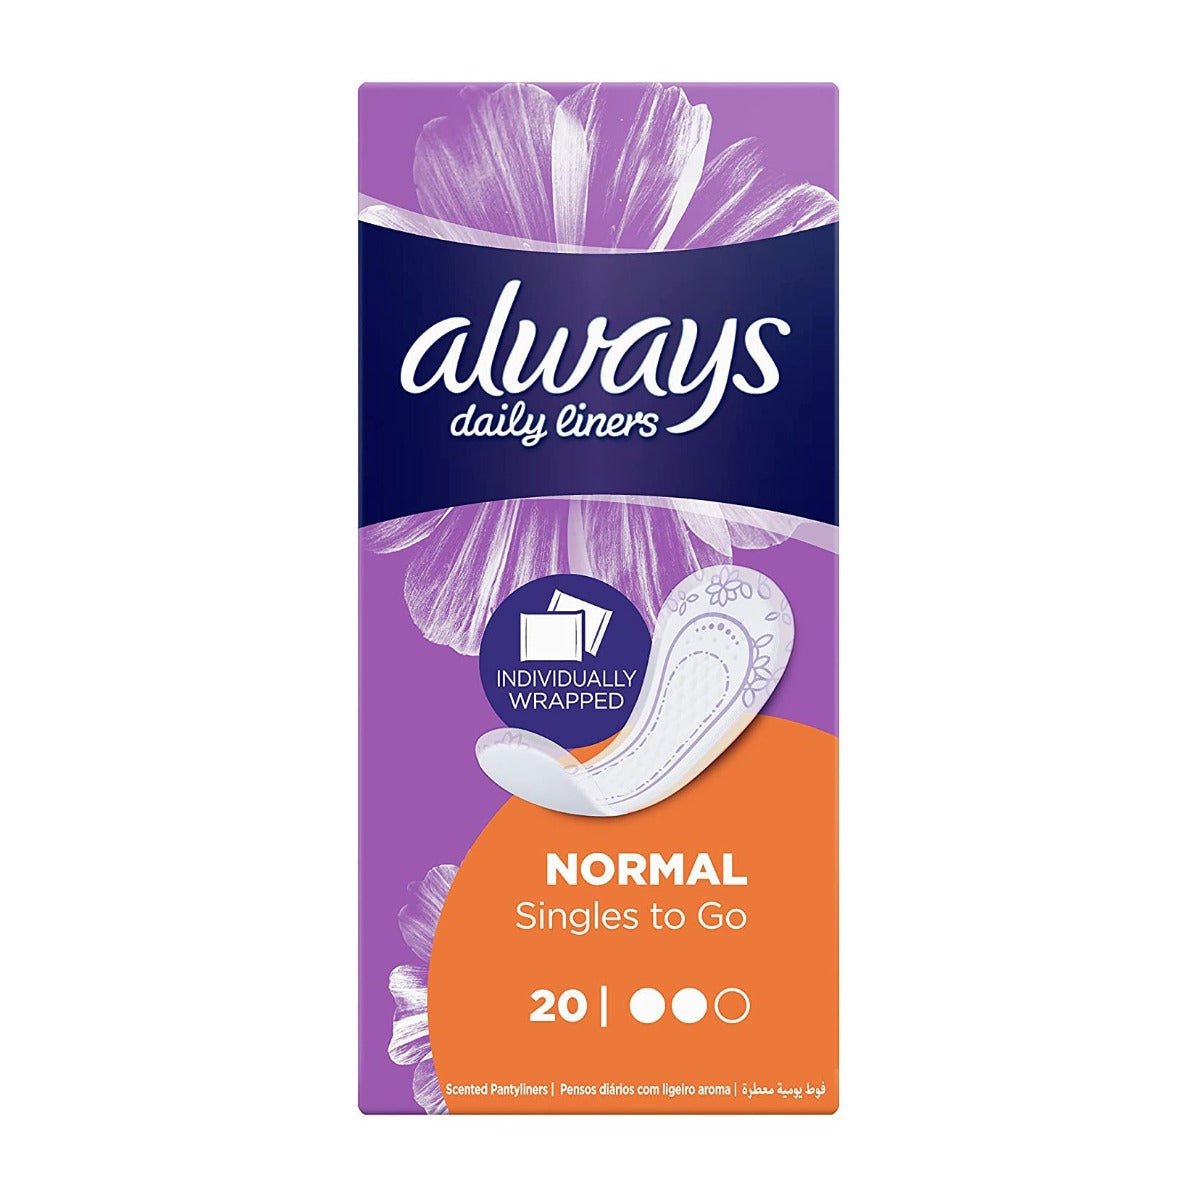 Always Daily Liners Comfort Protect - Bloom Pharmacy